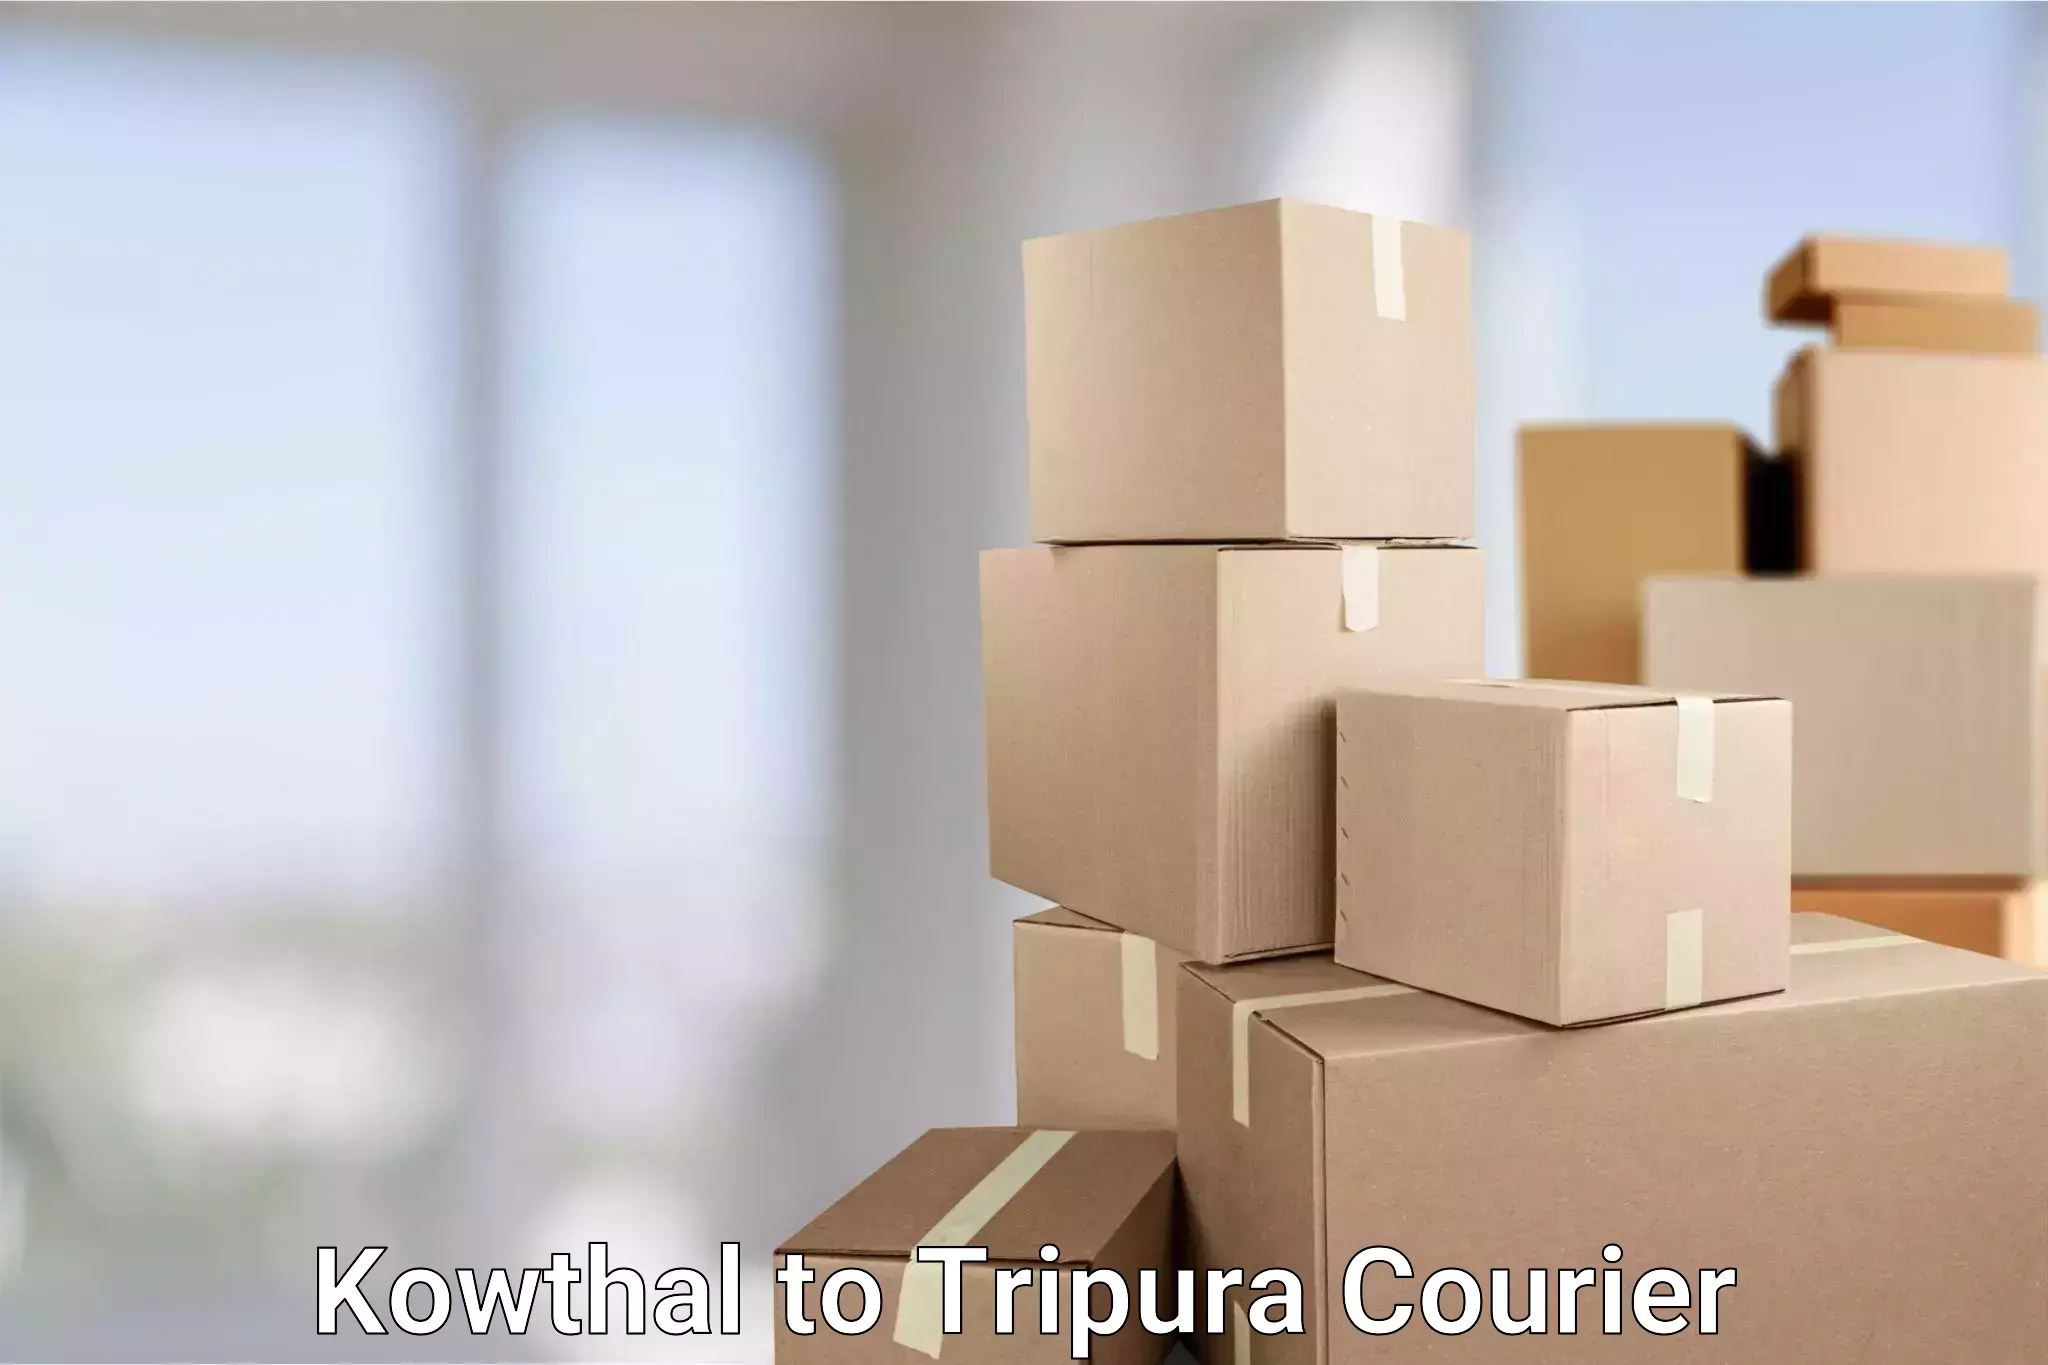 Track and trace shipping Kowthal to Udaipur Tripura